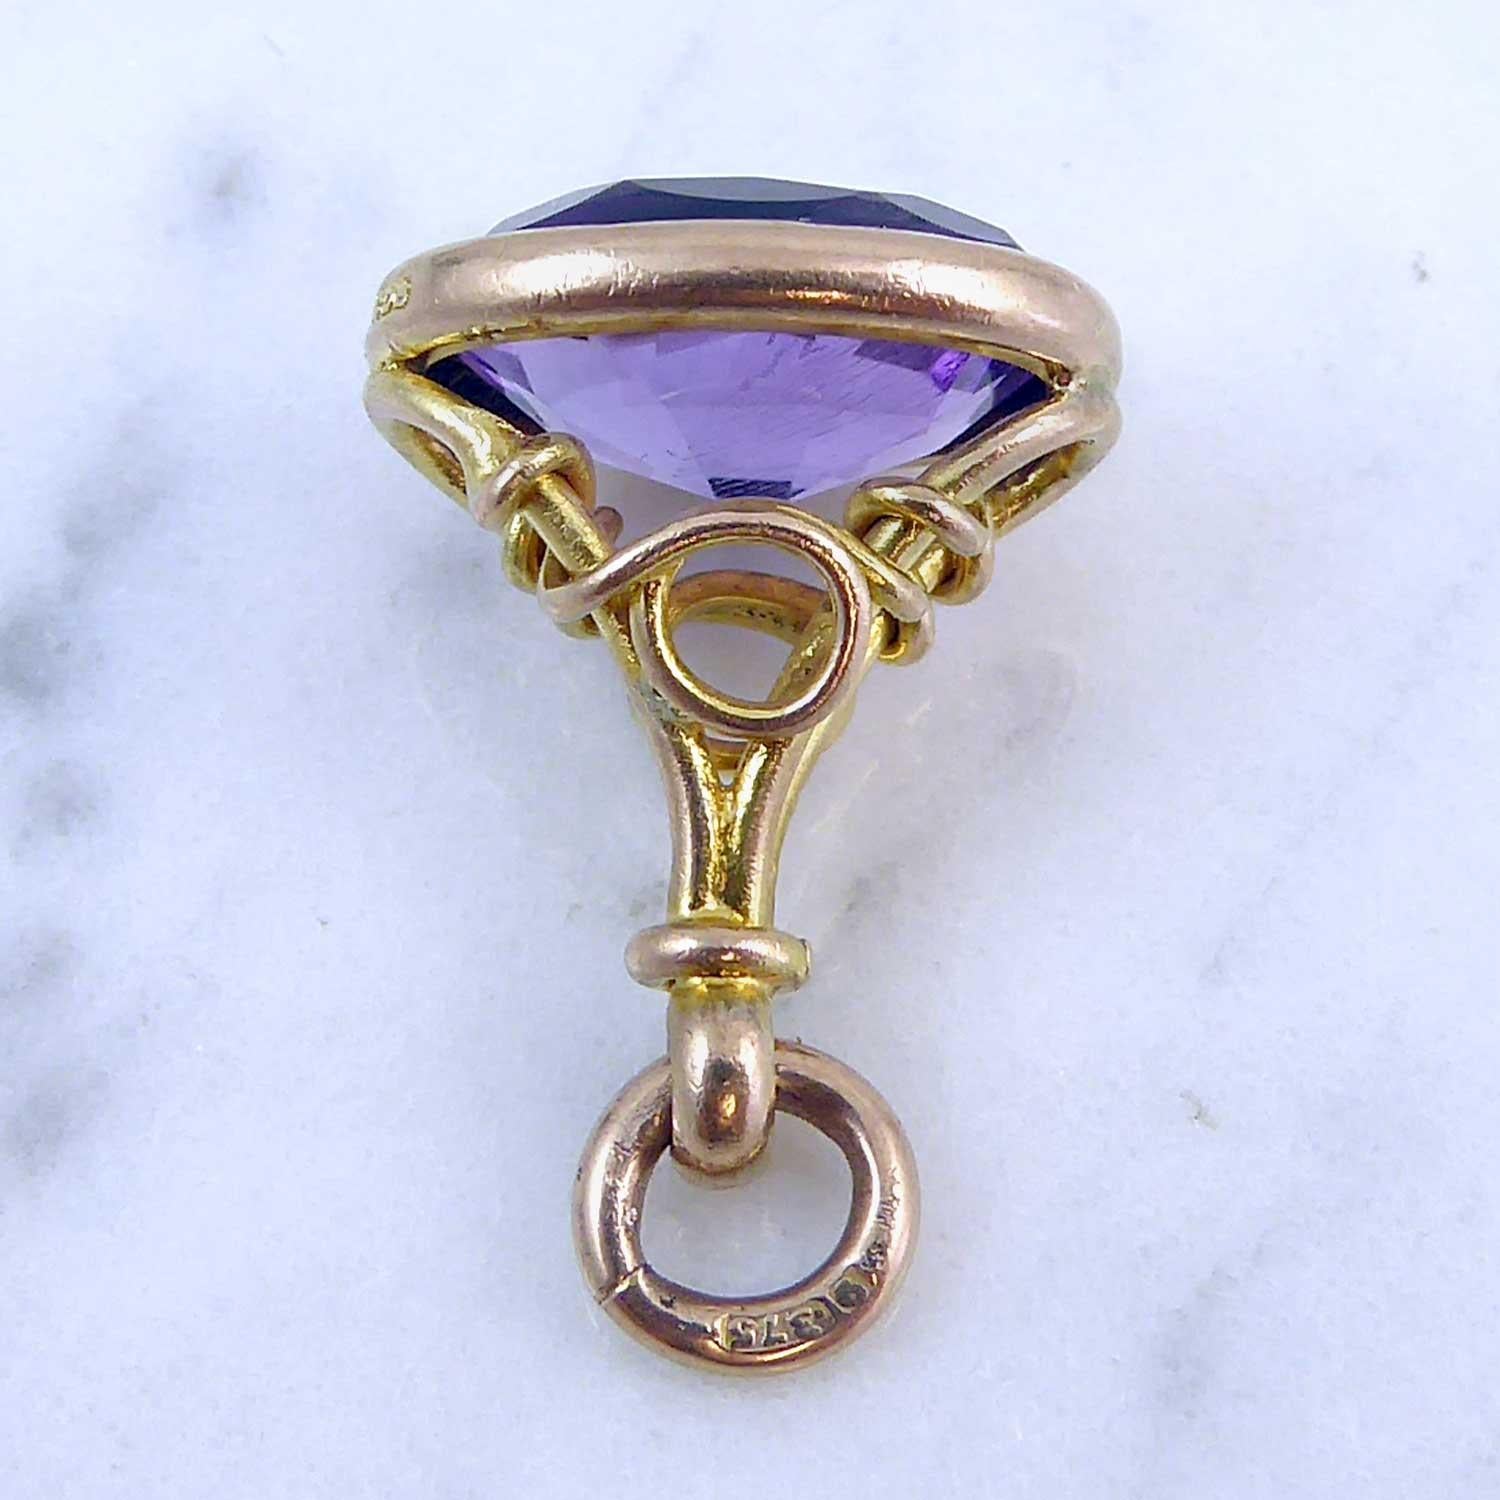 This is such a sweet antique fob - a perfect size to wear on a neck chain.  A decorative scroll and knot style mount, hand made in 9ct rose gold holds an oval faceted amethyst in which the typical 